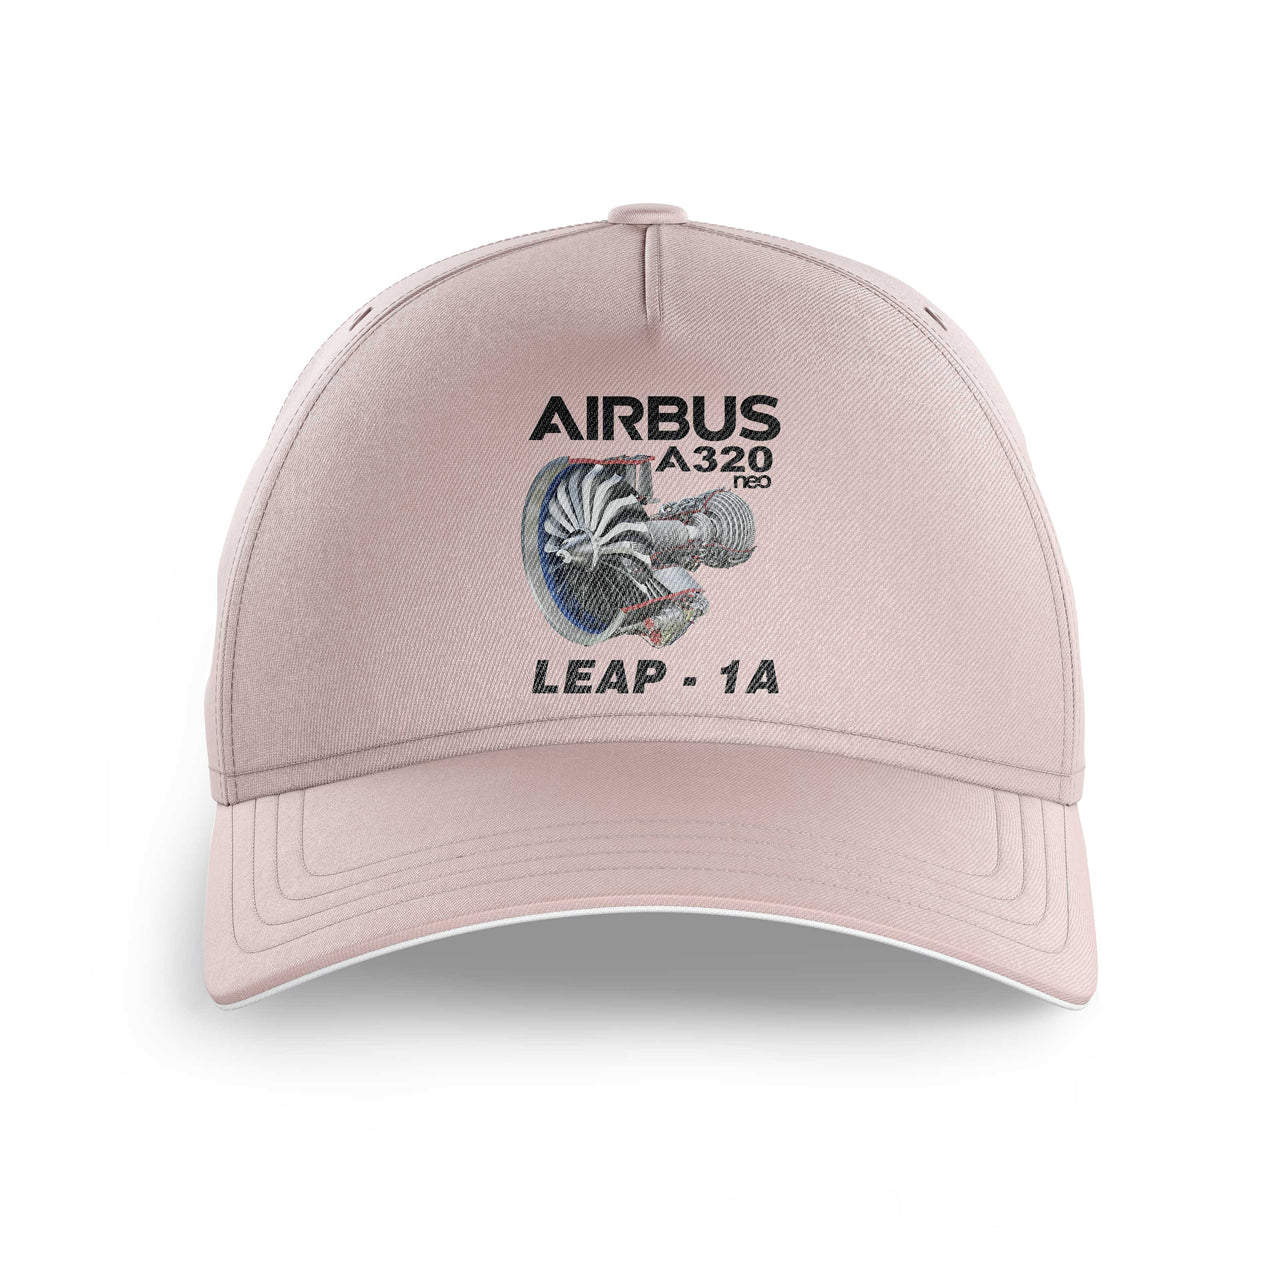 Airbus A320neo & Leap 1A Engine Printed Hats